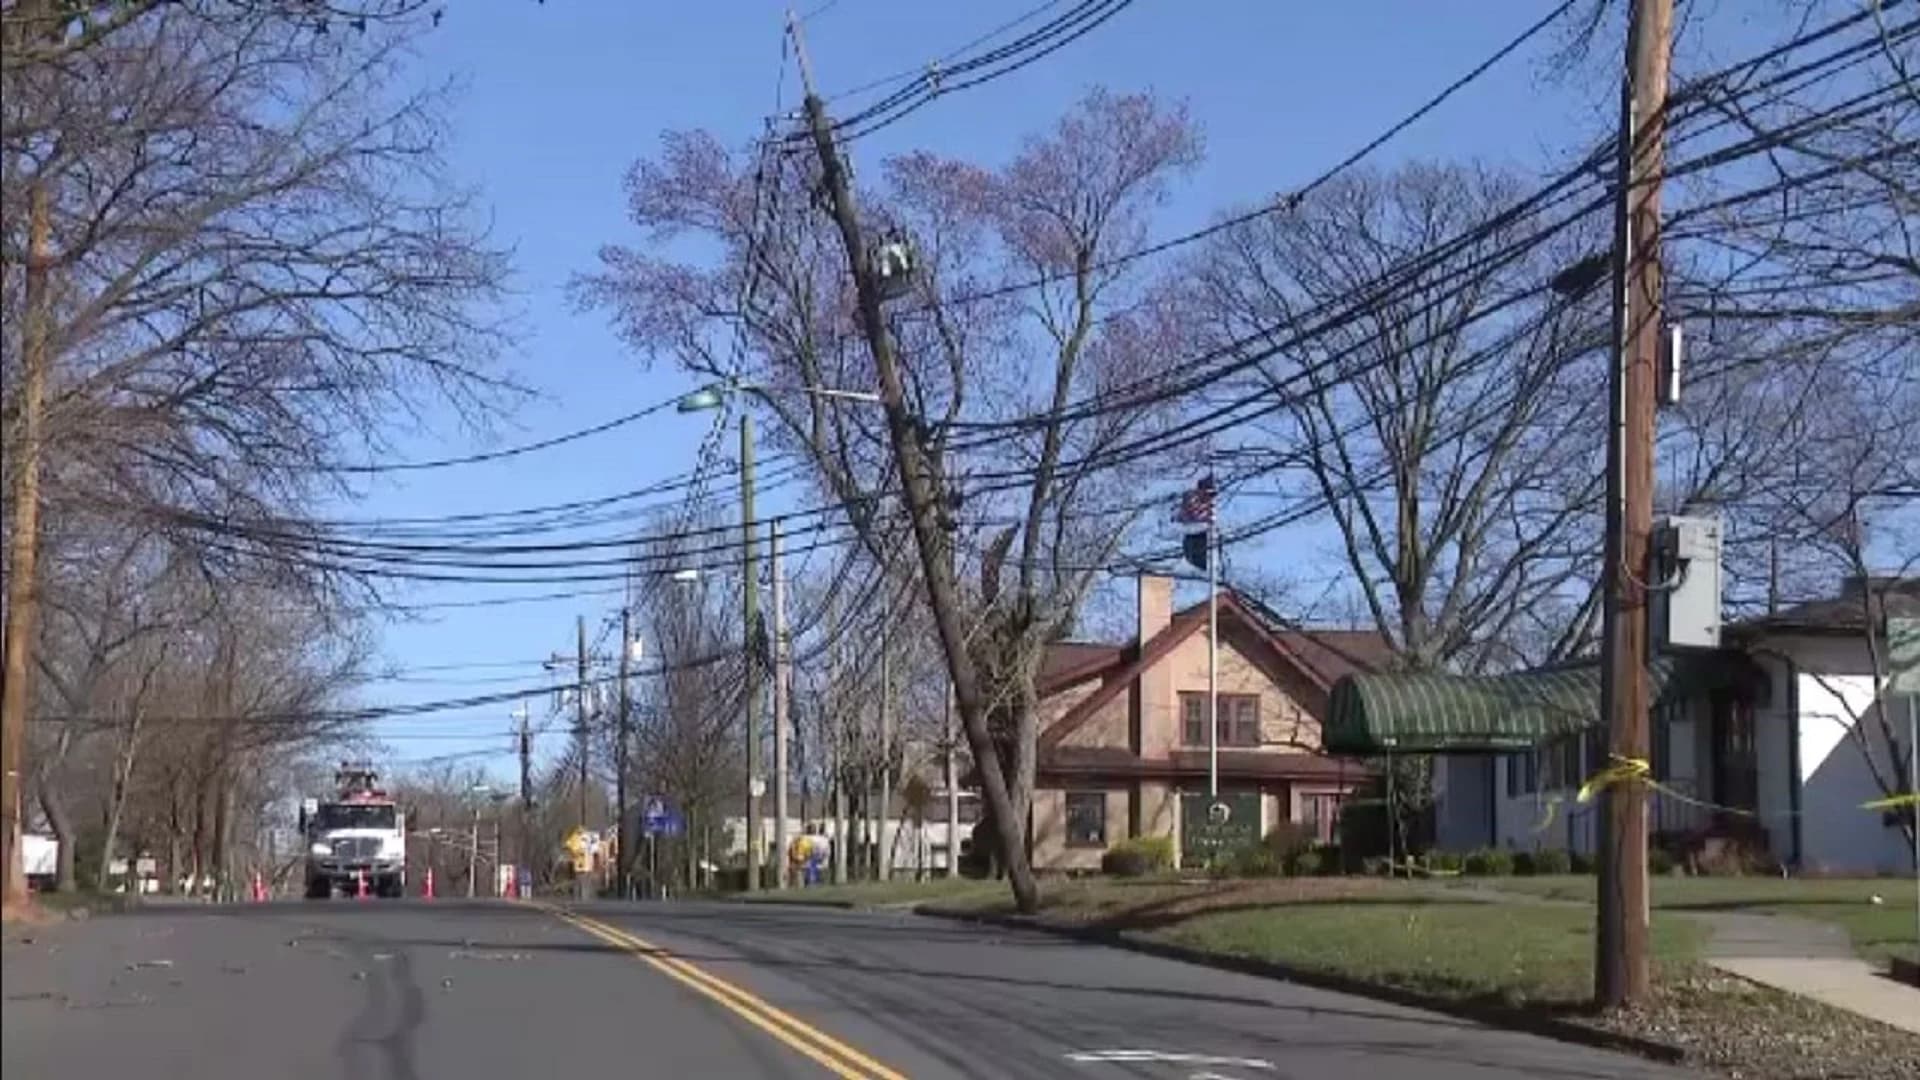 Powerful wind gusts knock out power to thousands, cause damage around NJ